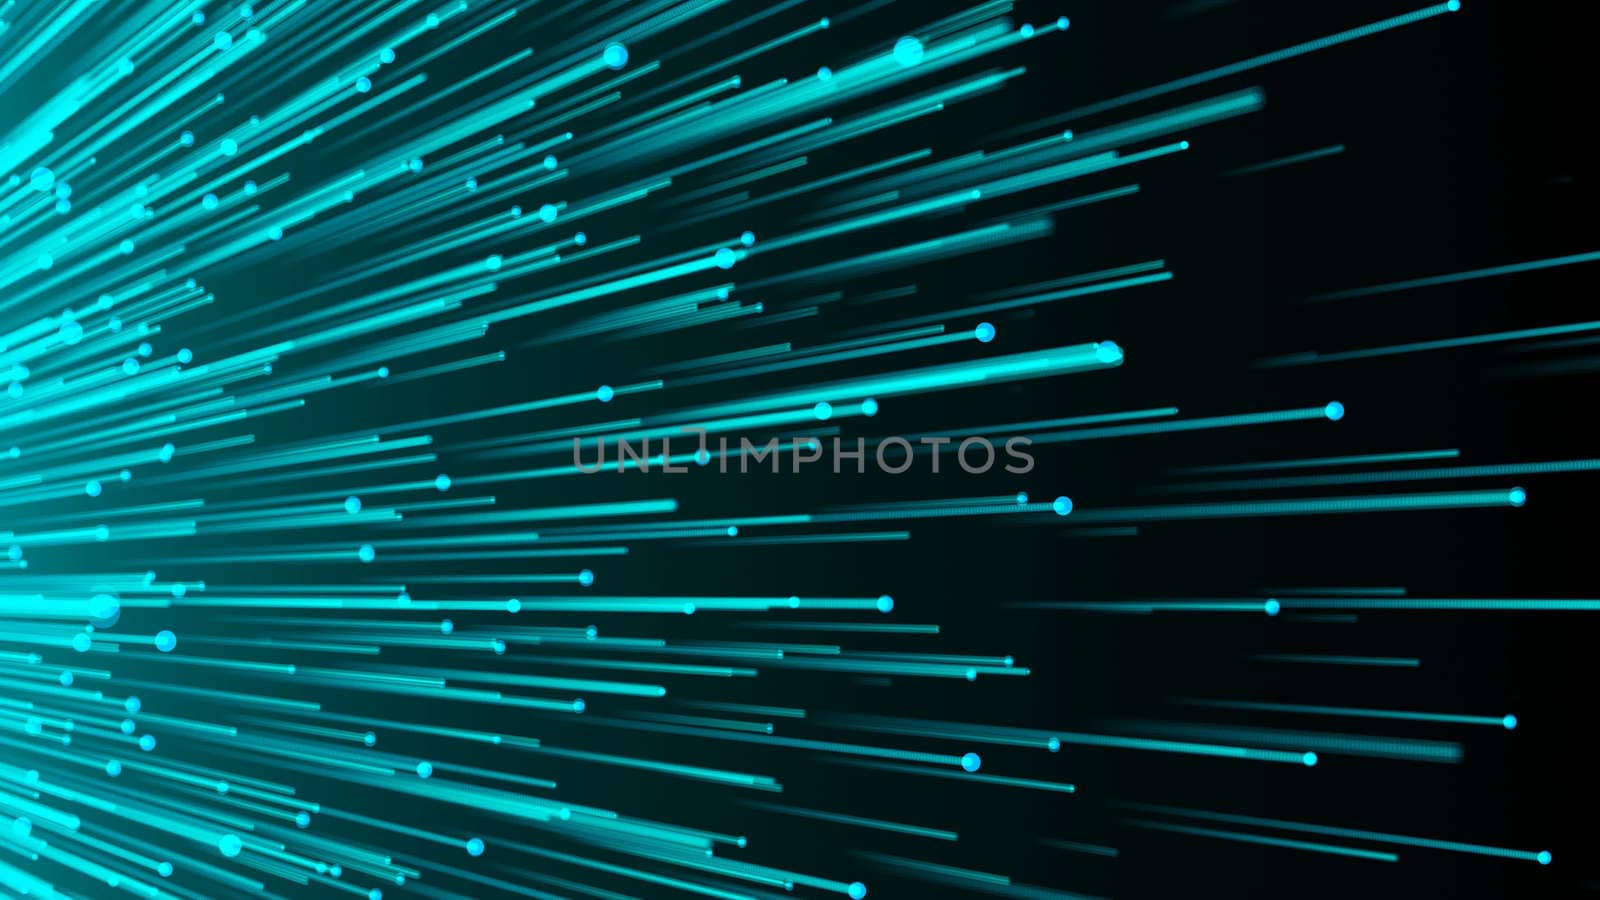 Abstract background with optical fibers. 3d rendering